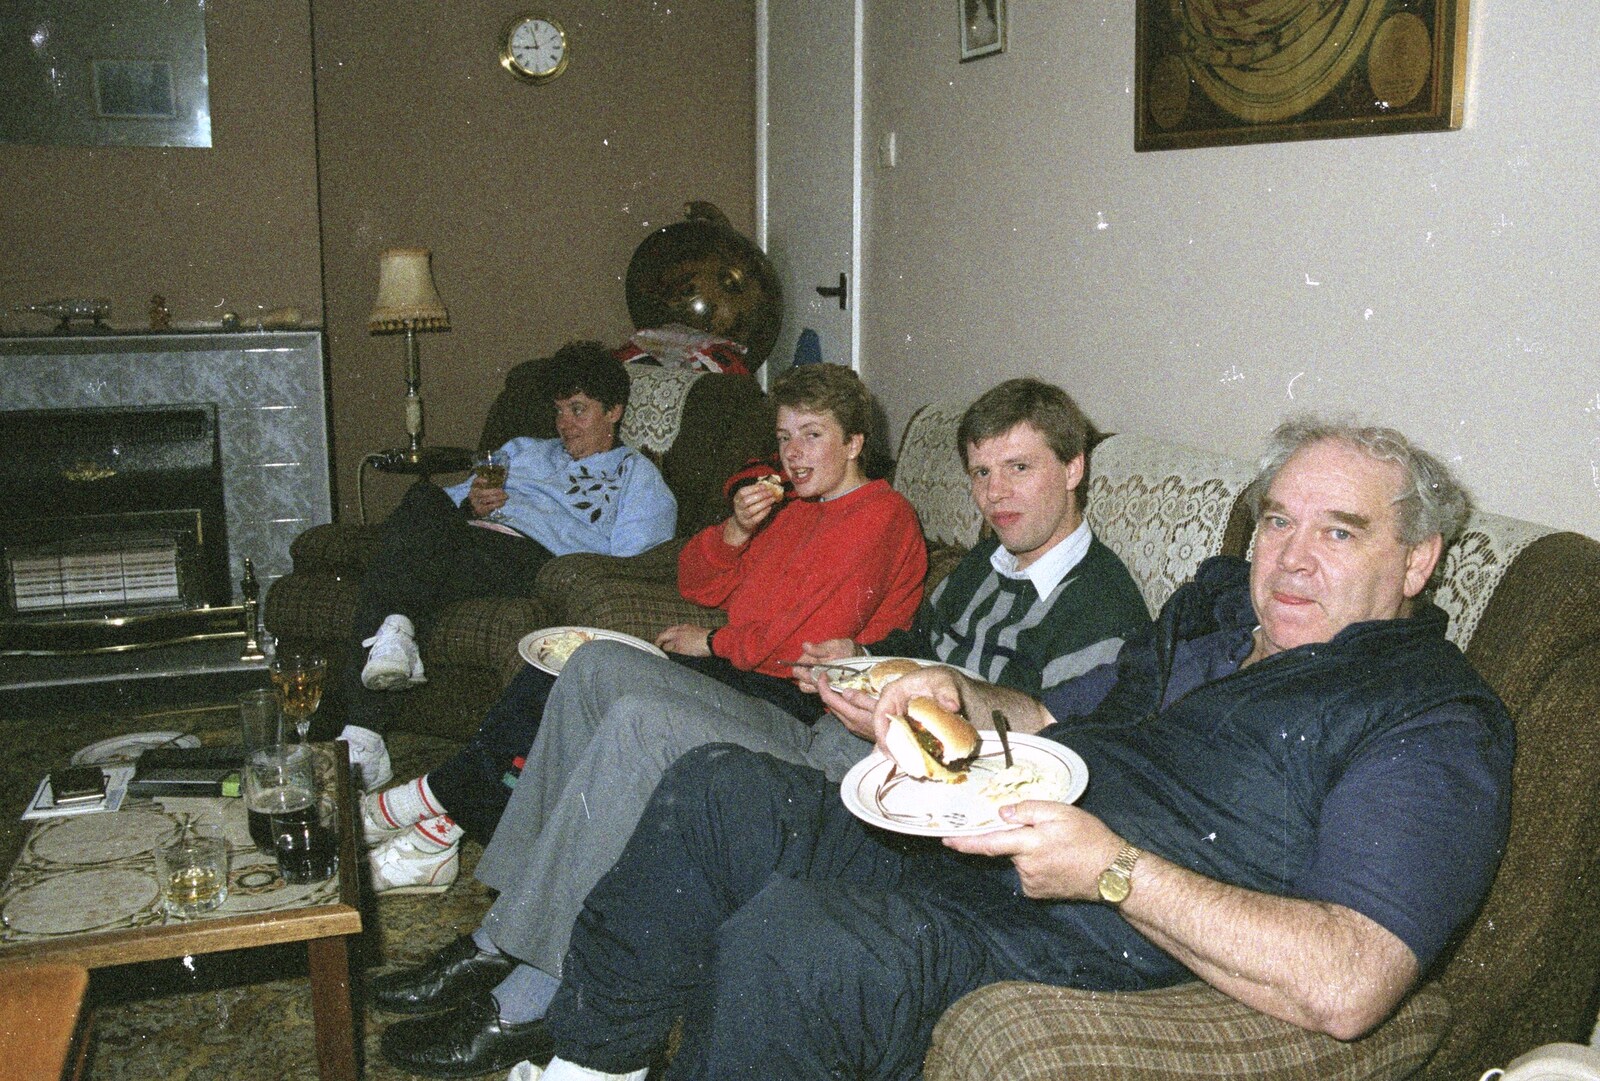 Crispy, Theresa, Steve-O and Kenny eat burgers from An "Above The Laundrette" Barbeque, Diss, Norfolk - 28th May 1990